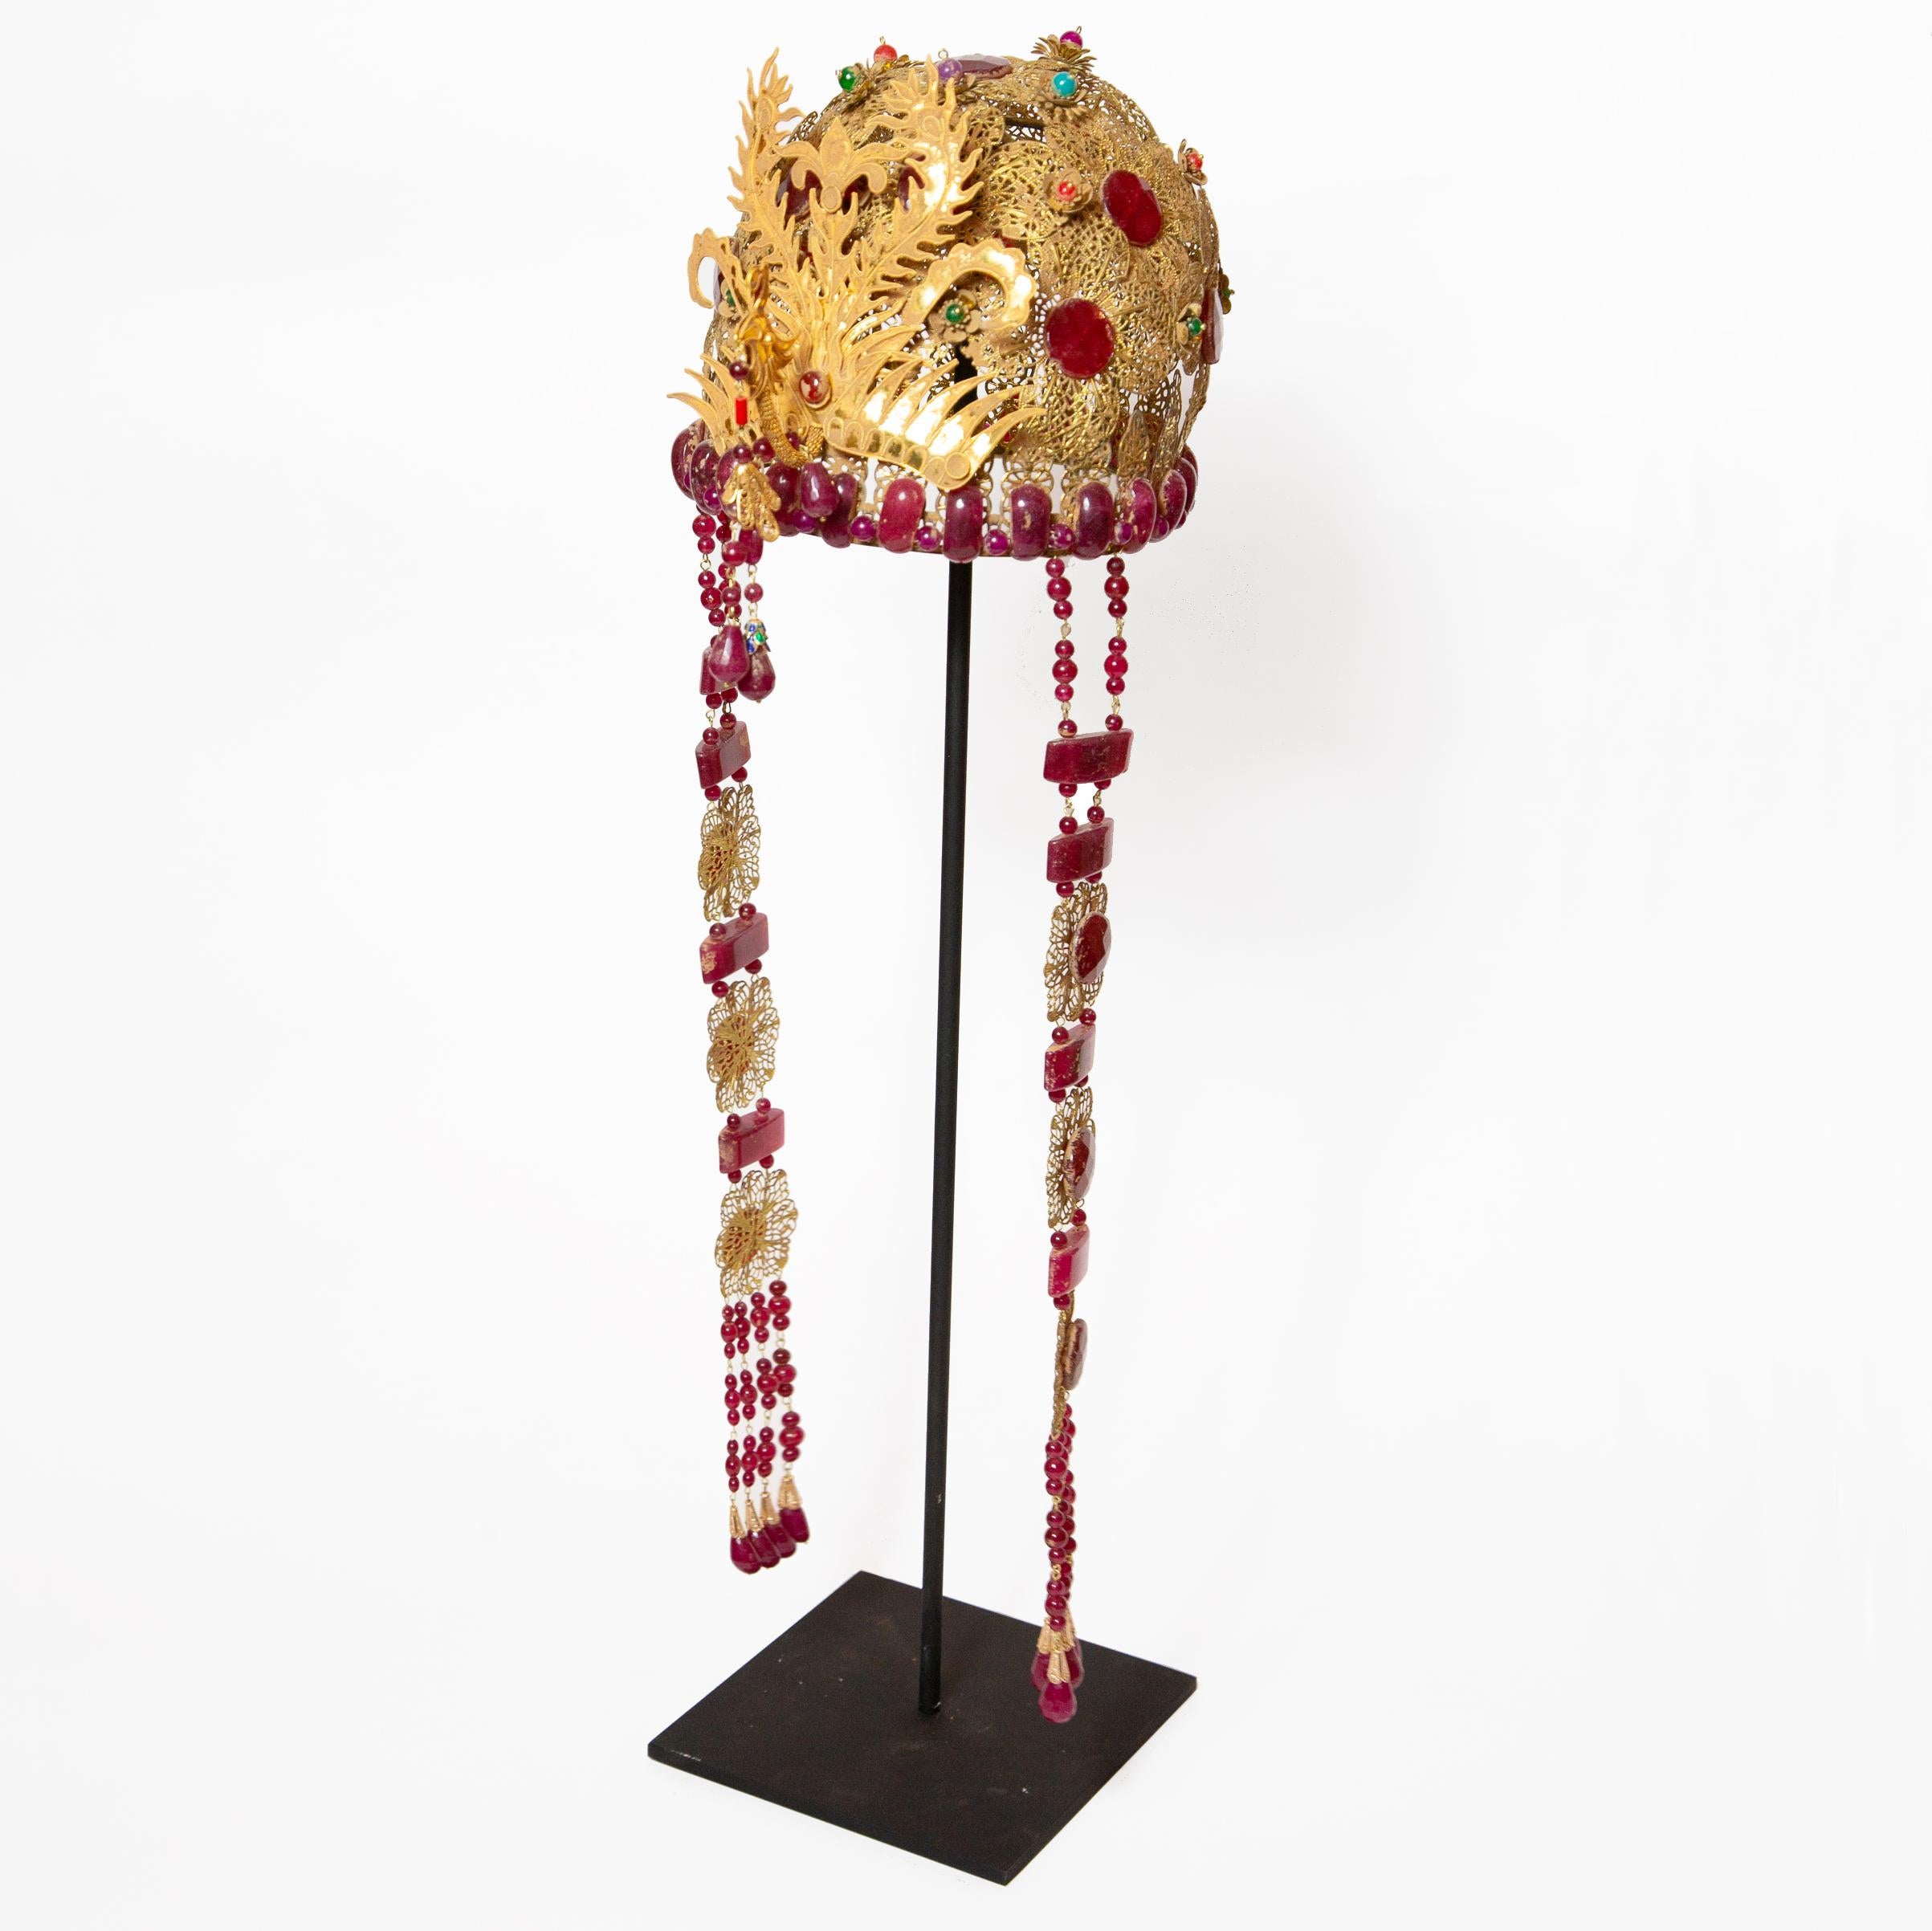 Chinese opera theatre headdress, ruby stone. Chinese opera theatre headdress with ornate gold flowers, dangling tassels, and rooster. Mid-20th century, mounted on a custom black painted metal base. Size: 25